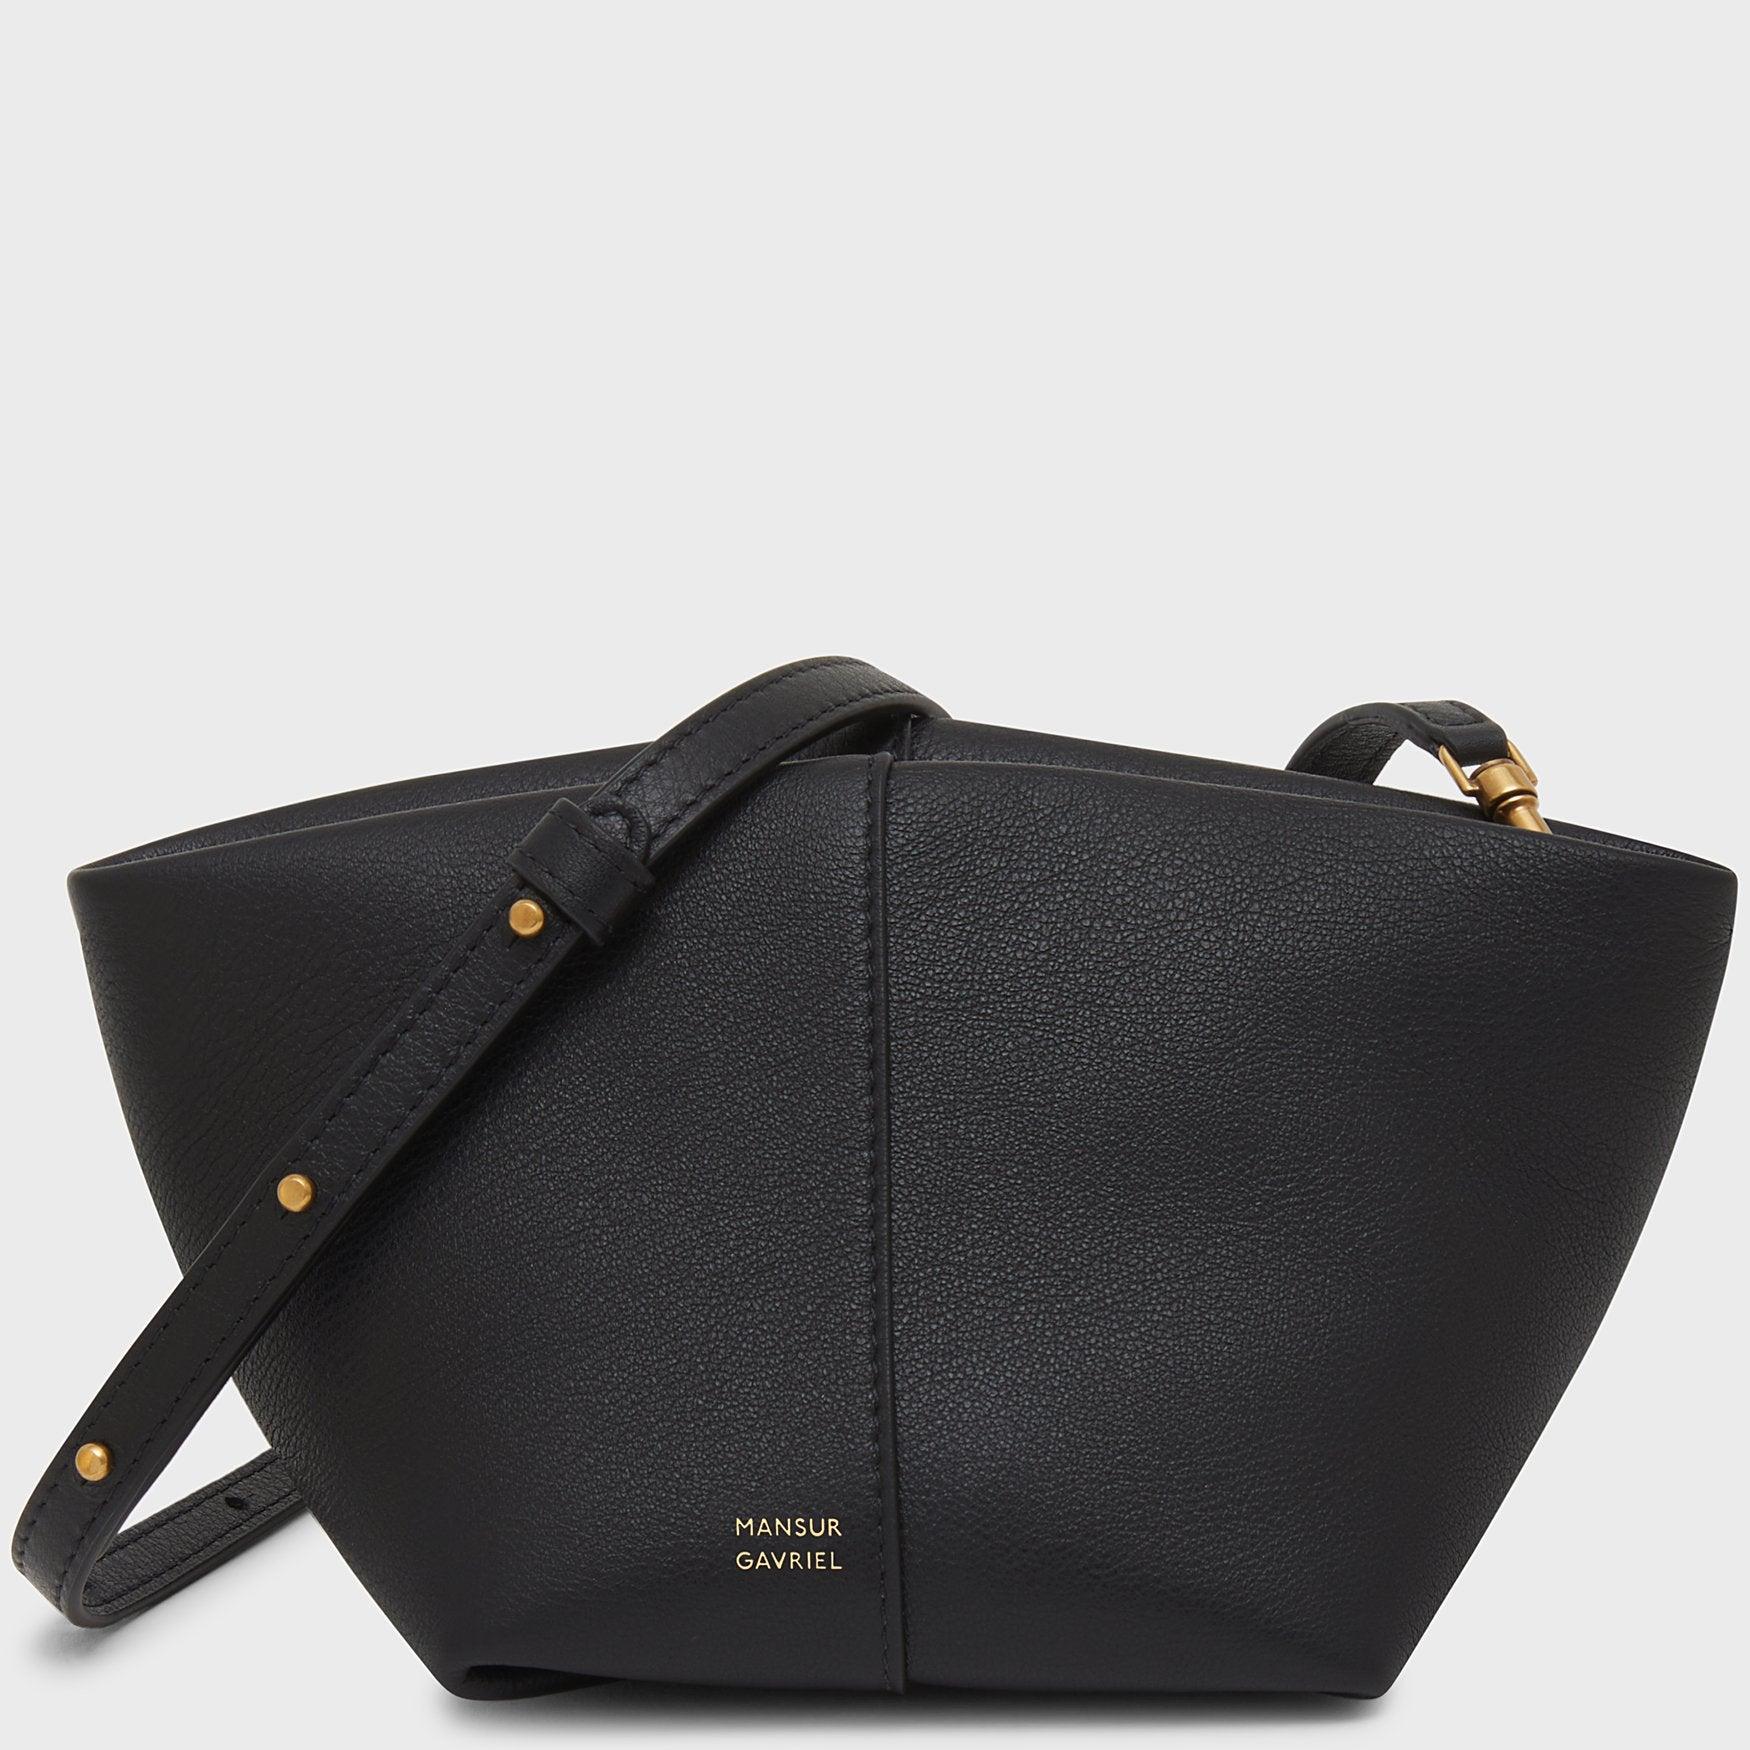 Mansur Gavriel Leather Tulipano Compact Bag in Black | Lyst